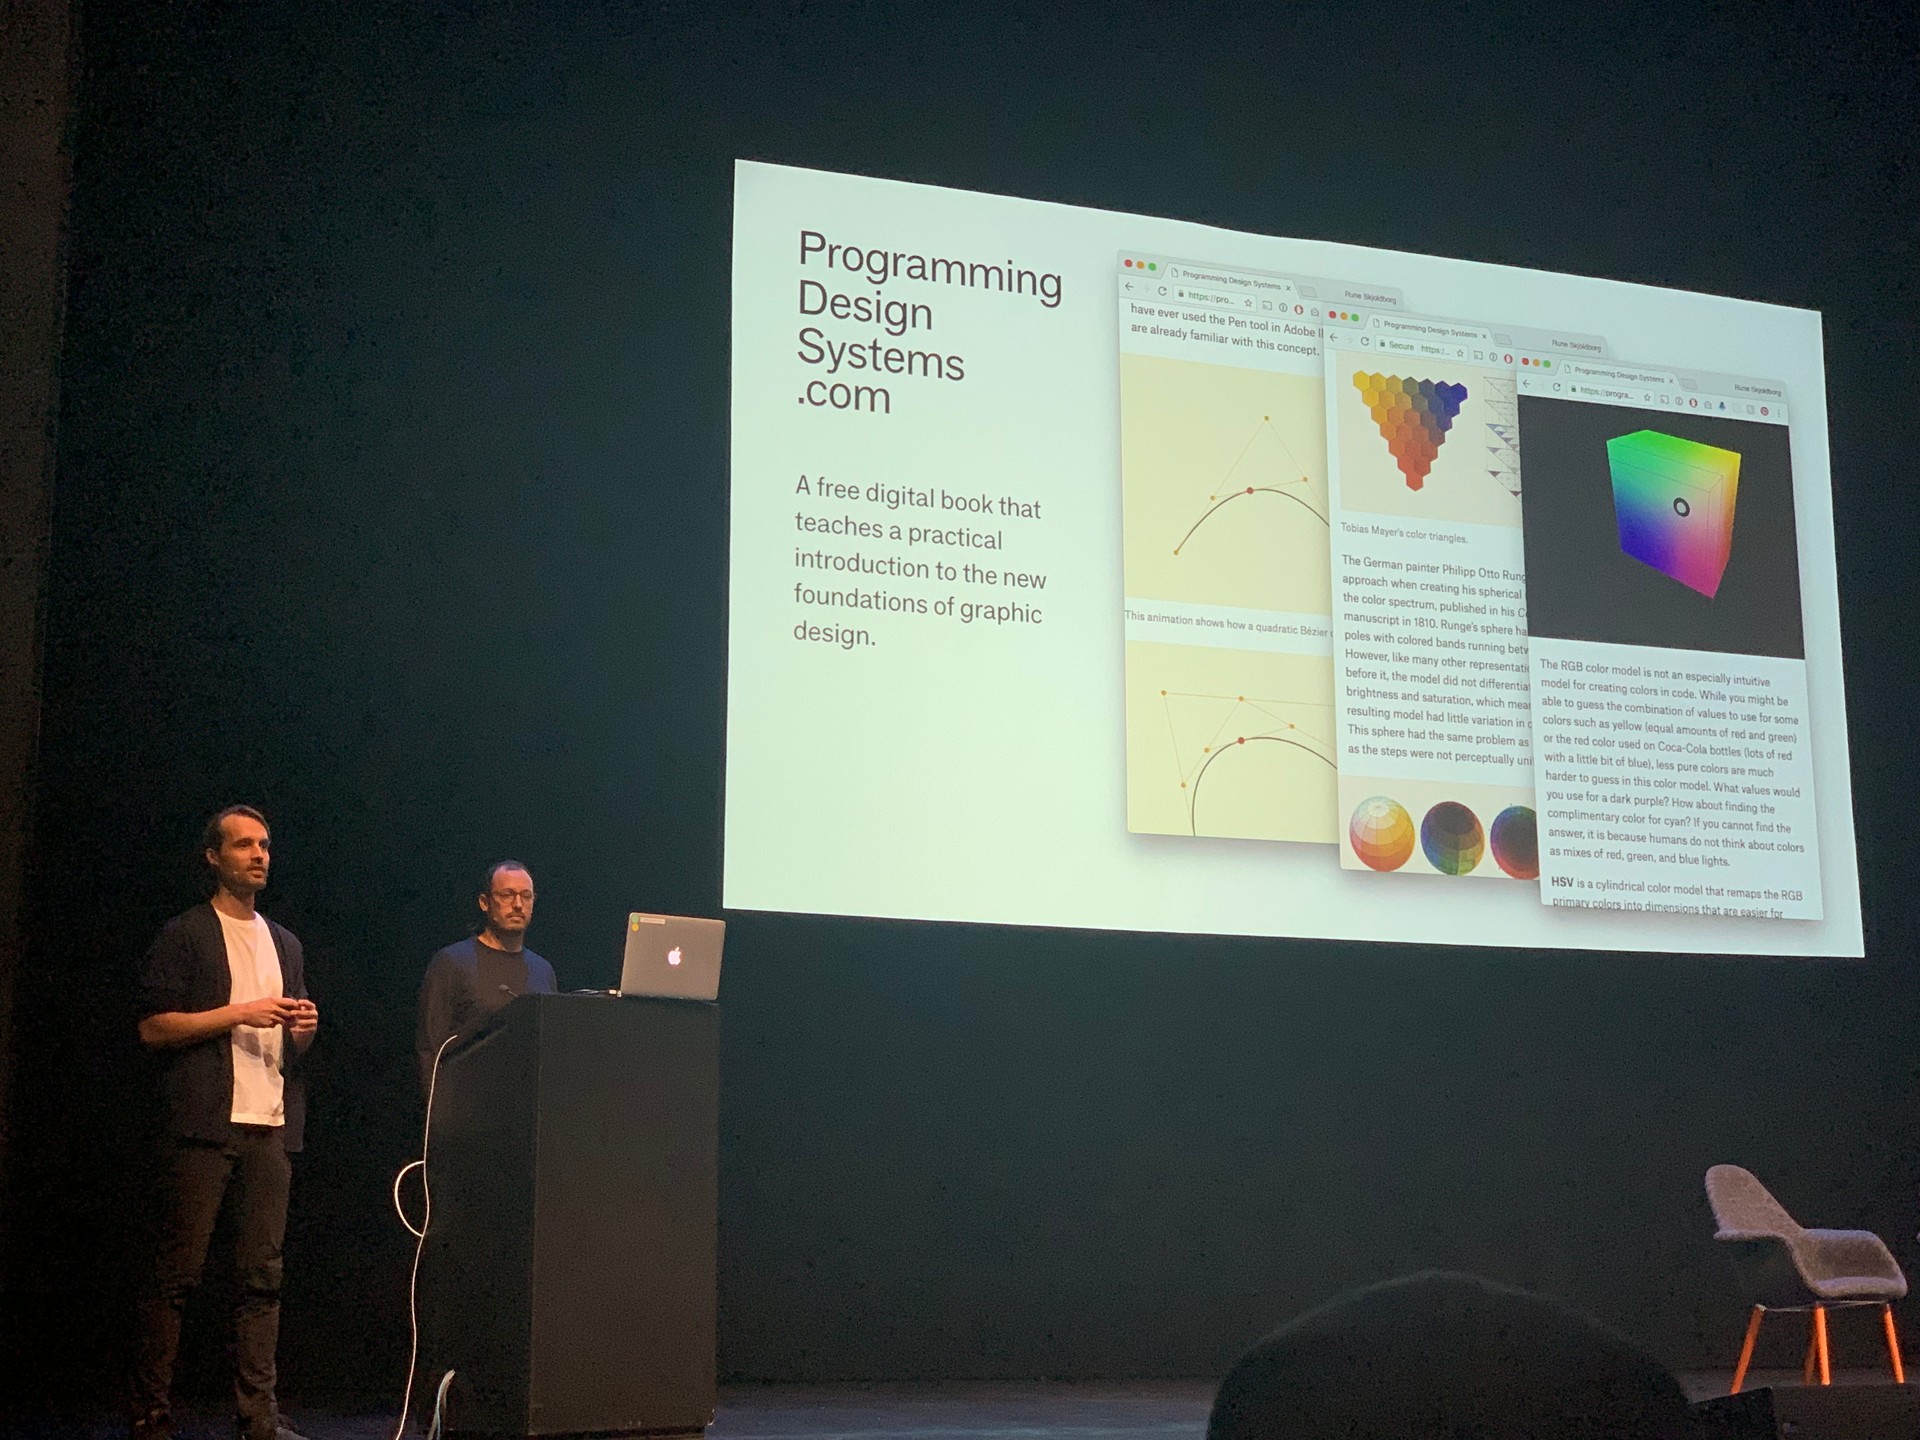 Rune and Martín presenting at Clarity 2018 in San Francisco.